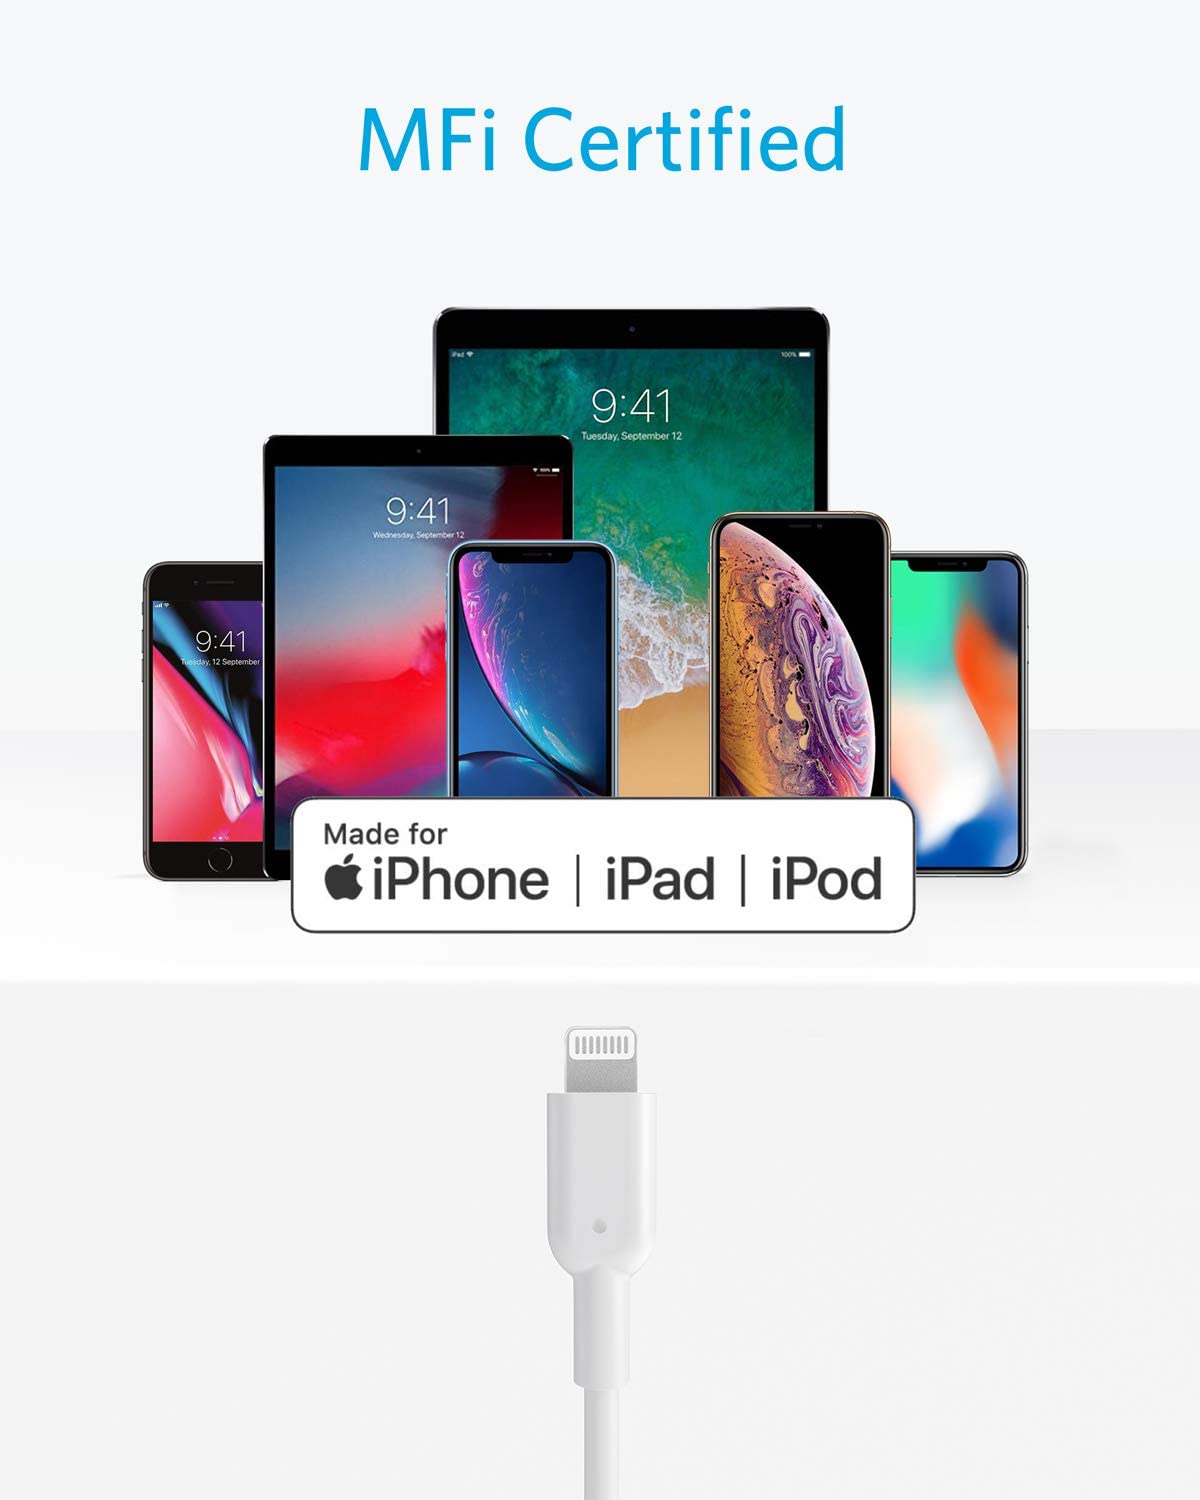 USB Wall Charger, [MFi Certified] iPhone Charger Lightning Cable 6FT(4PACK)  Fast Charging Data Sync Cords Dual Port USB Plug Compatible with iPhone